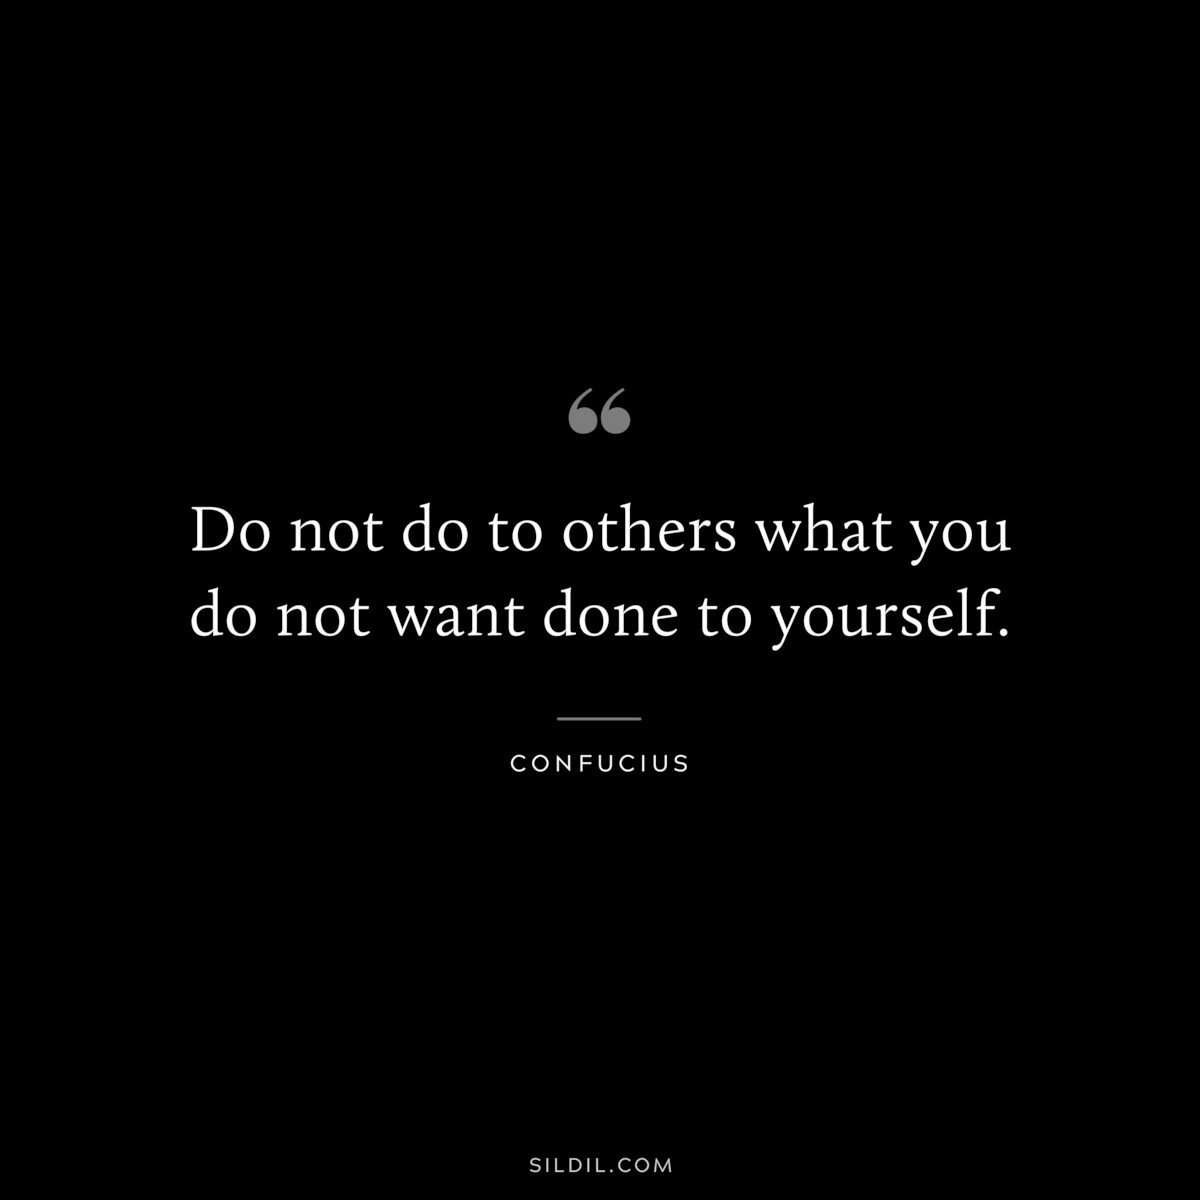 Do not do to others what you do not want done to yourself. ― Confucius